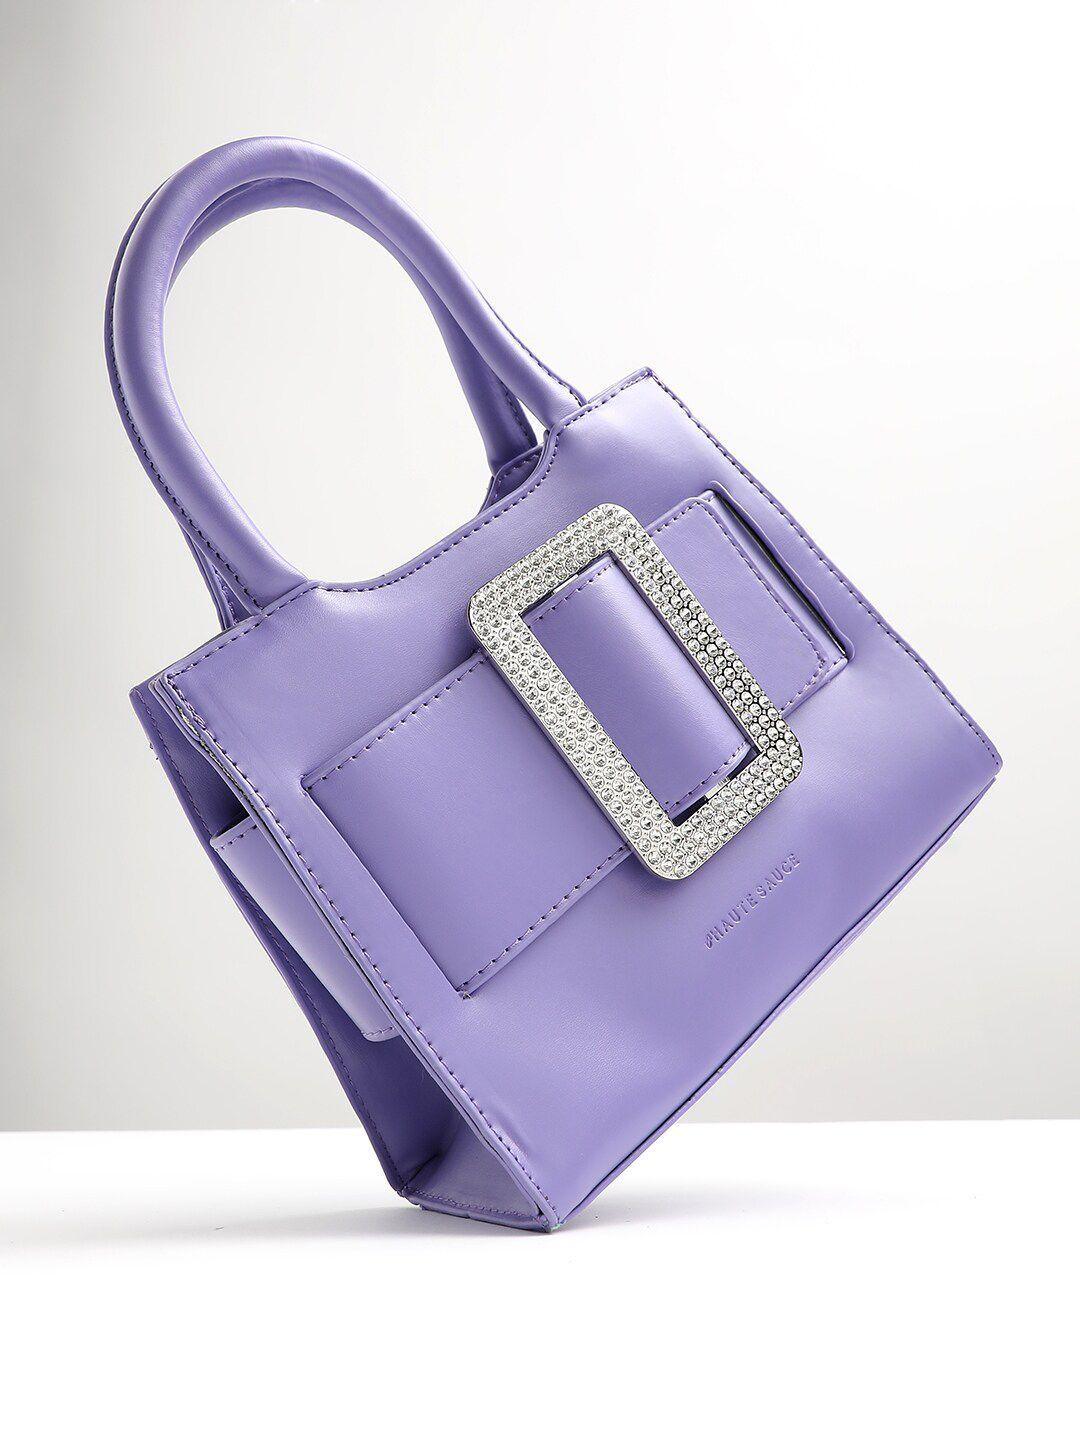 haute sauce by campus sutra lavender structured handheld bag